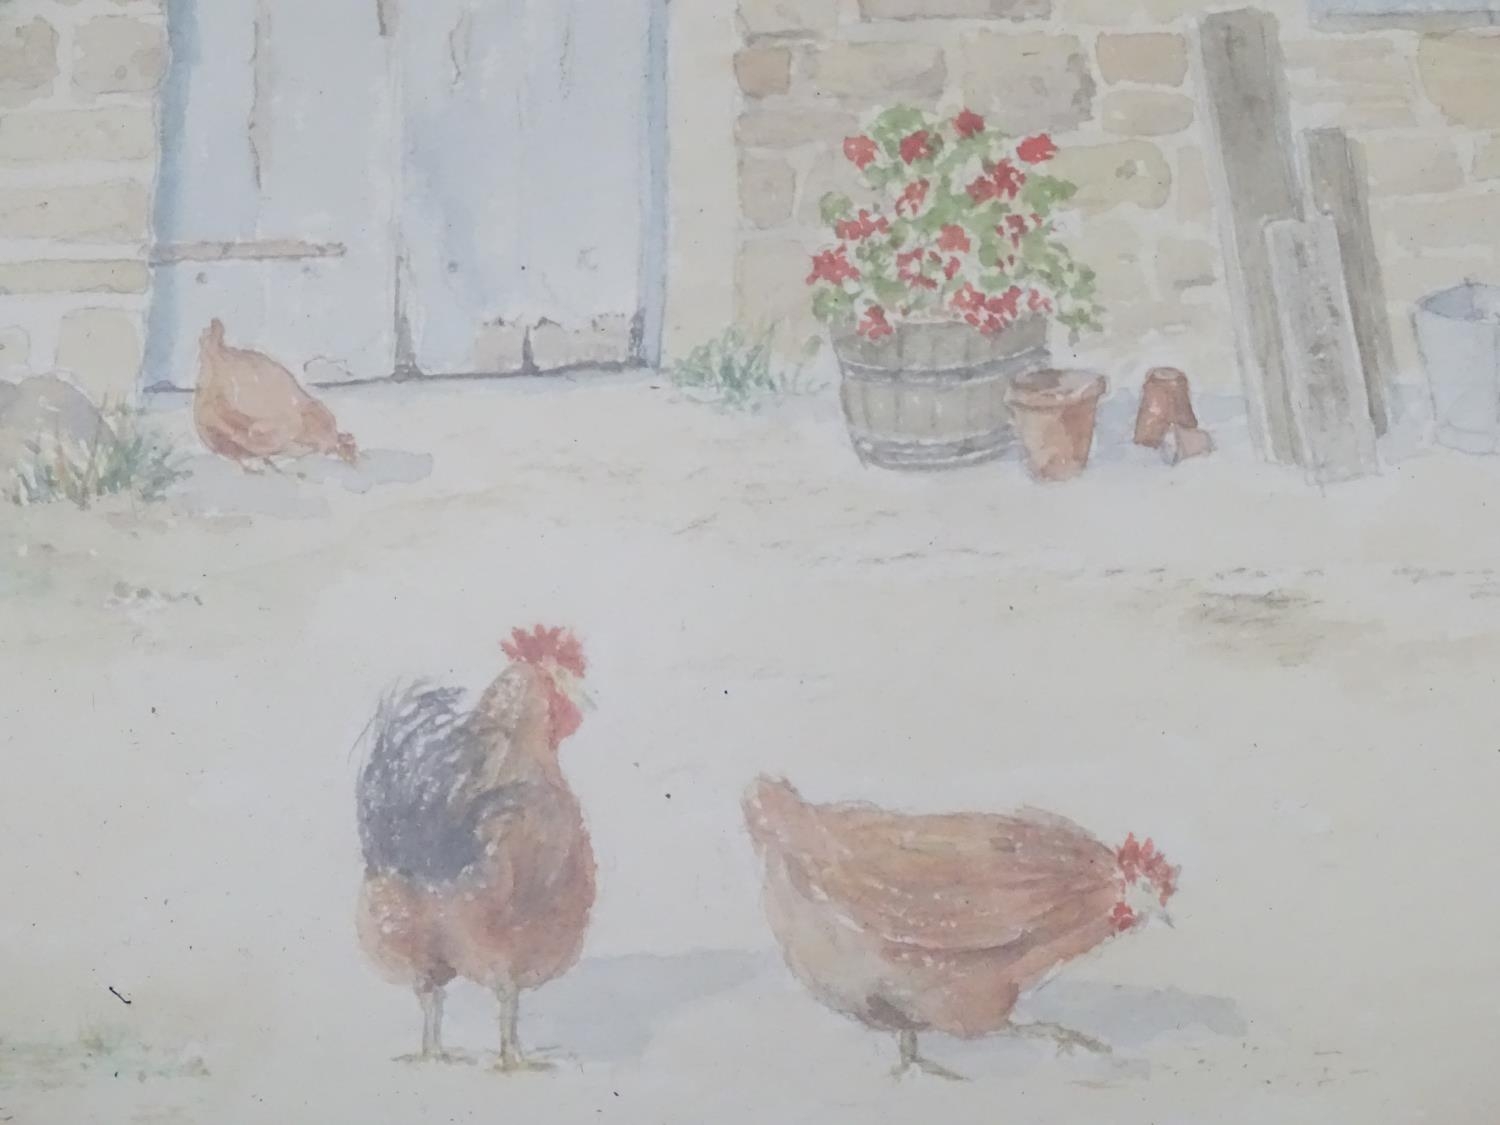 A watercolour depicting chickens in a barnyard, signed P. Tunnicliffe Please Note - we do not make - Image 4 of 6